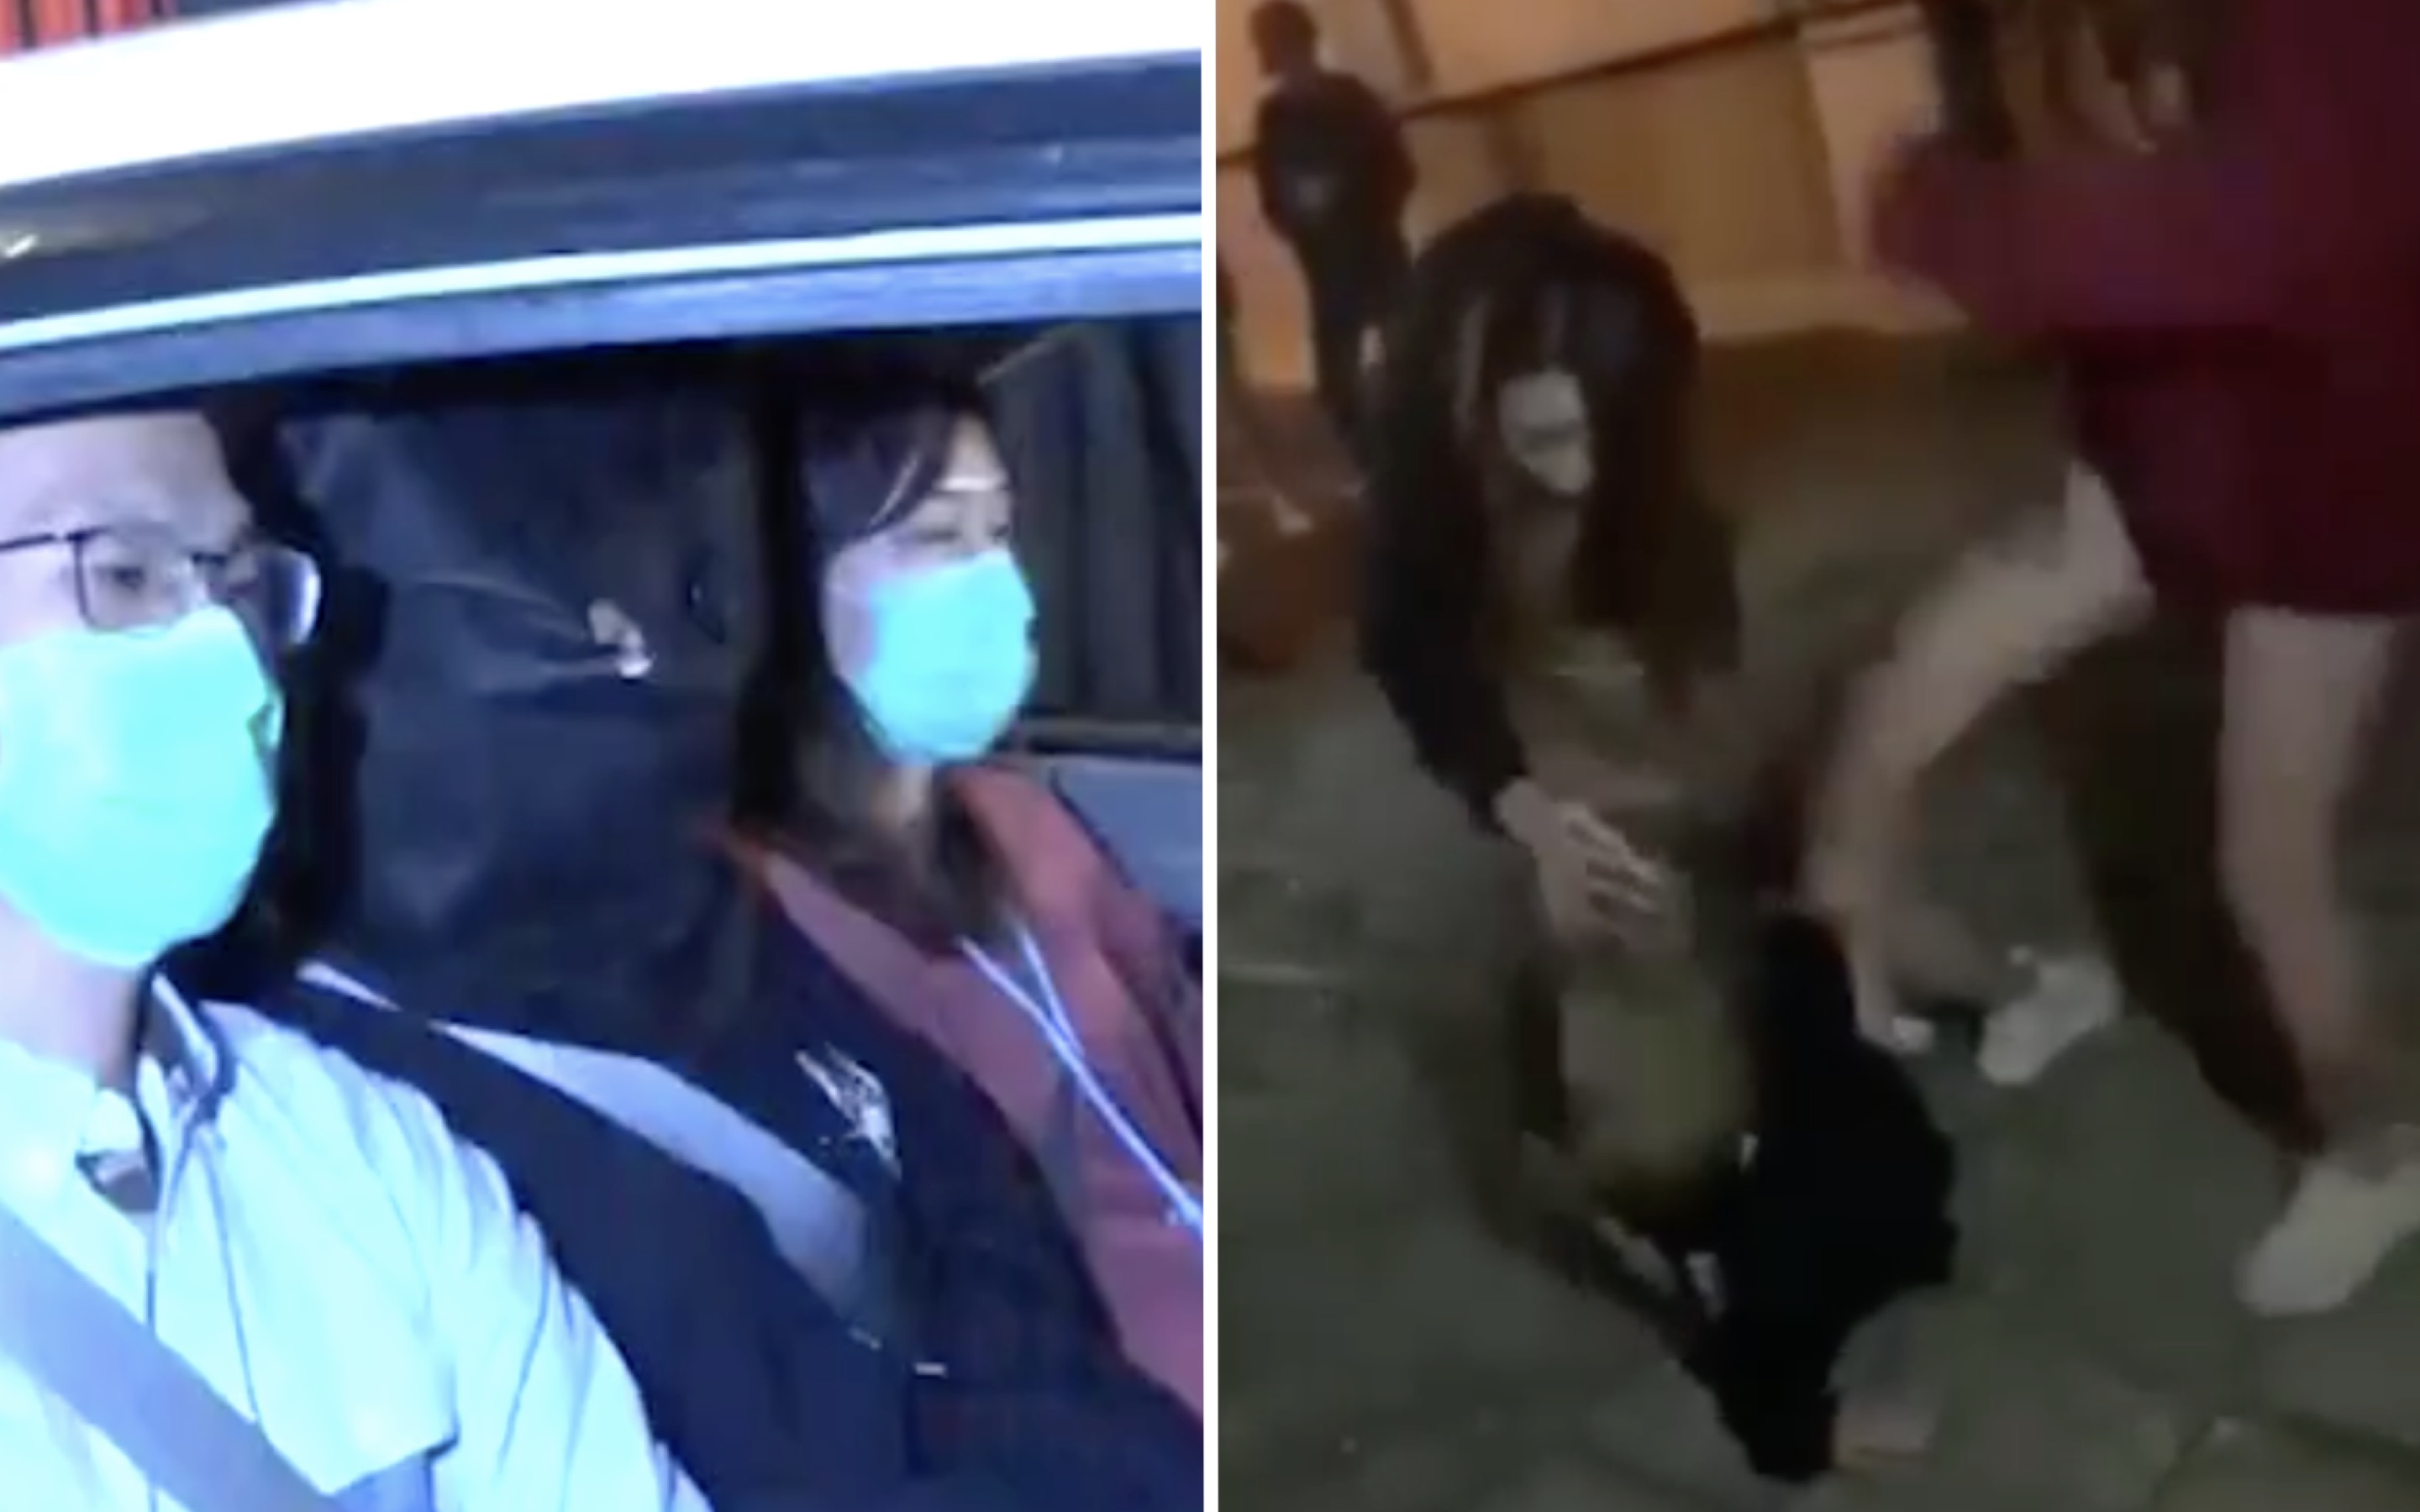 Police have arrested a 17-year-old girl believed to have been involved with an assault on another young woman that was filmed and posted on social media. Screengrabs via Apple Daily video and Facebook.